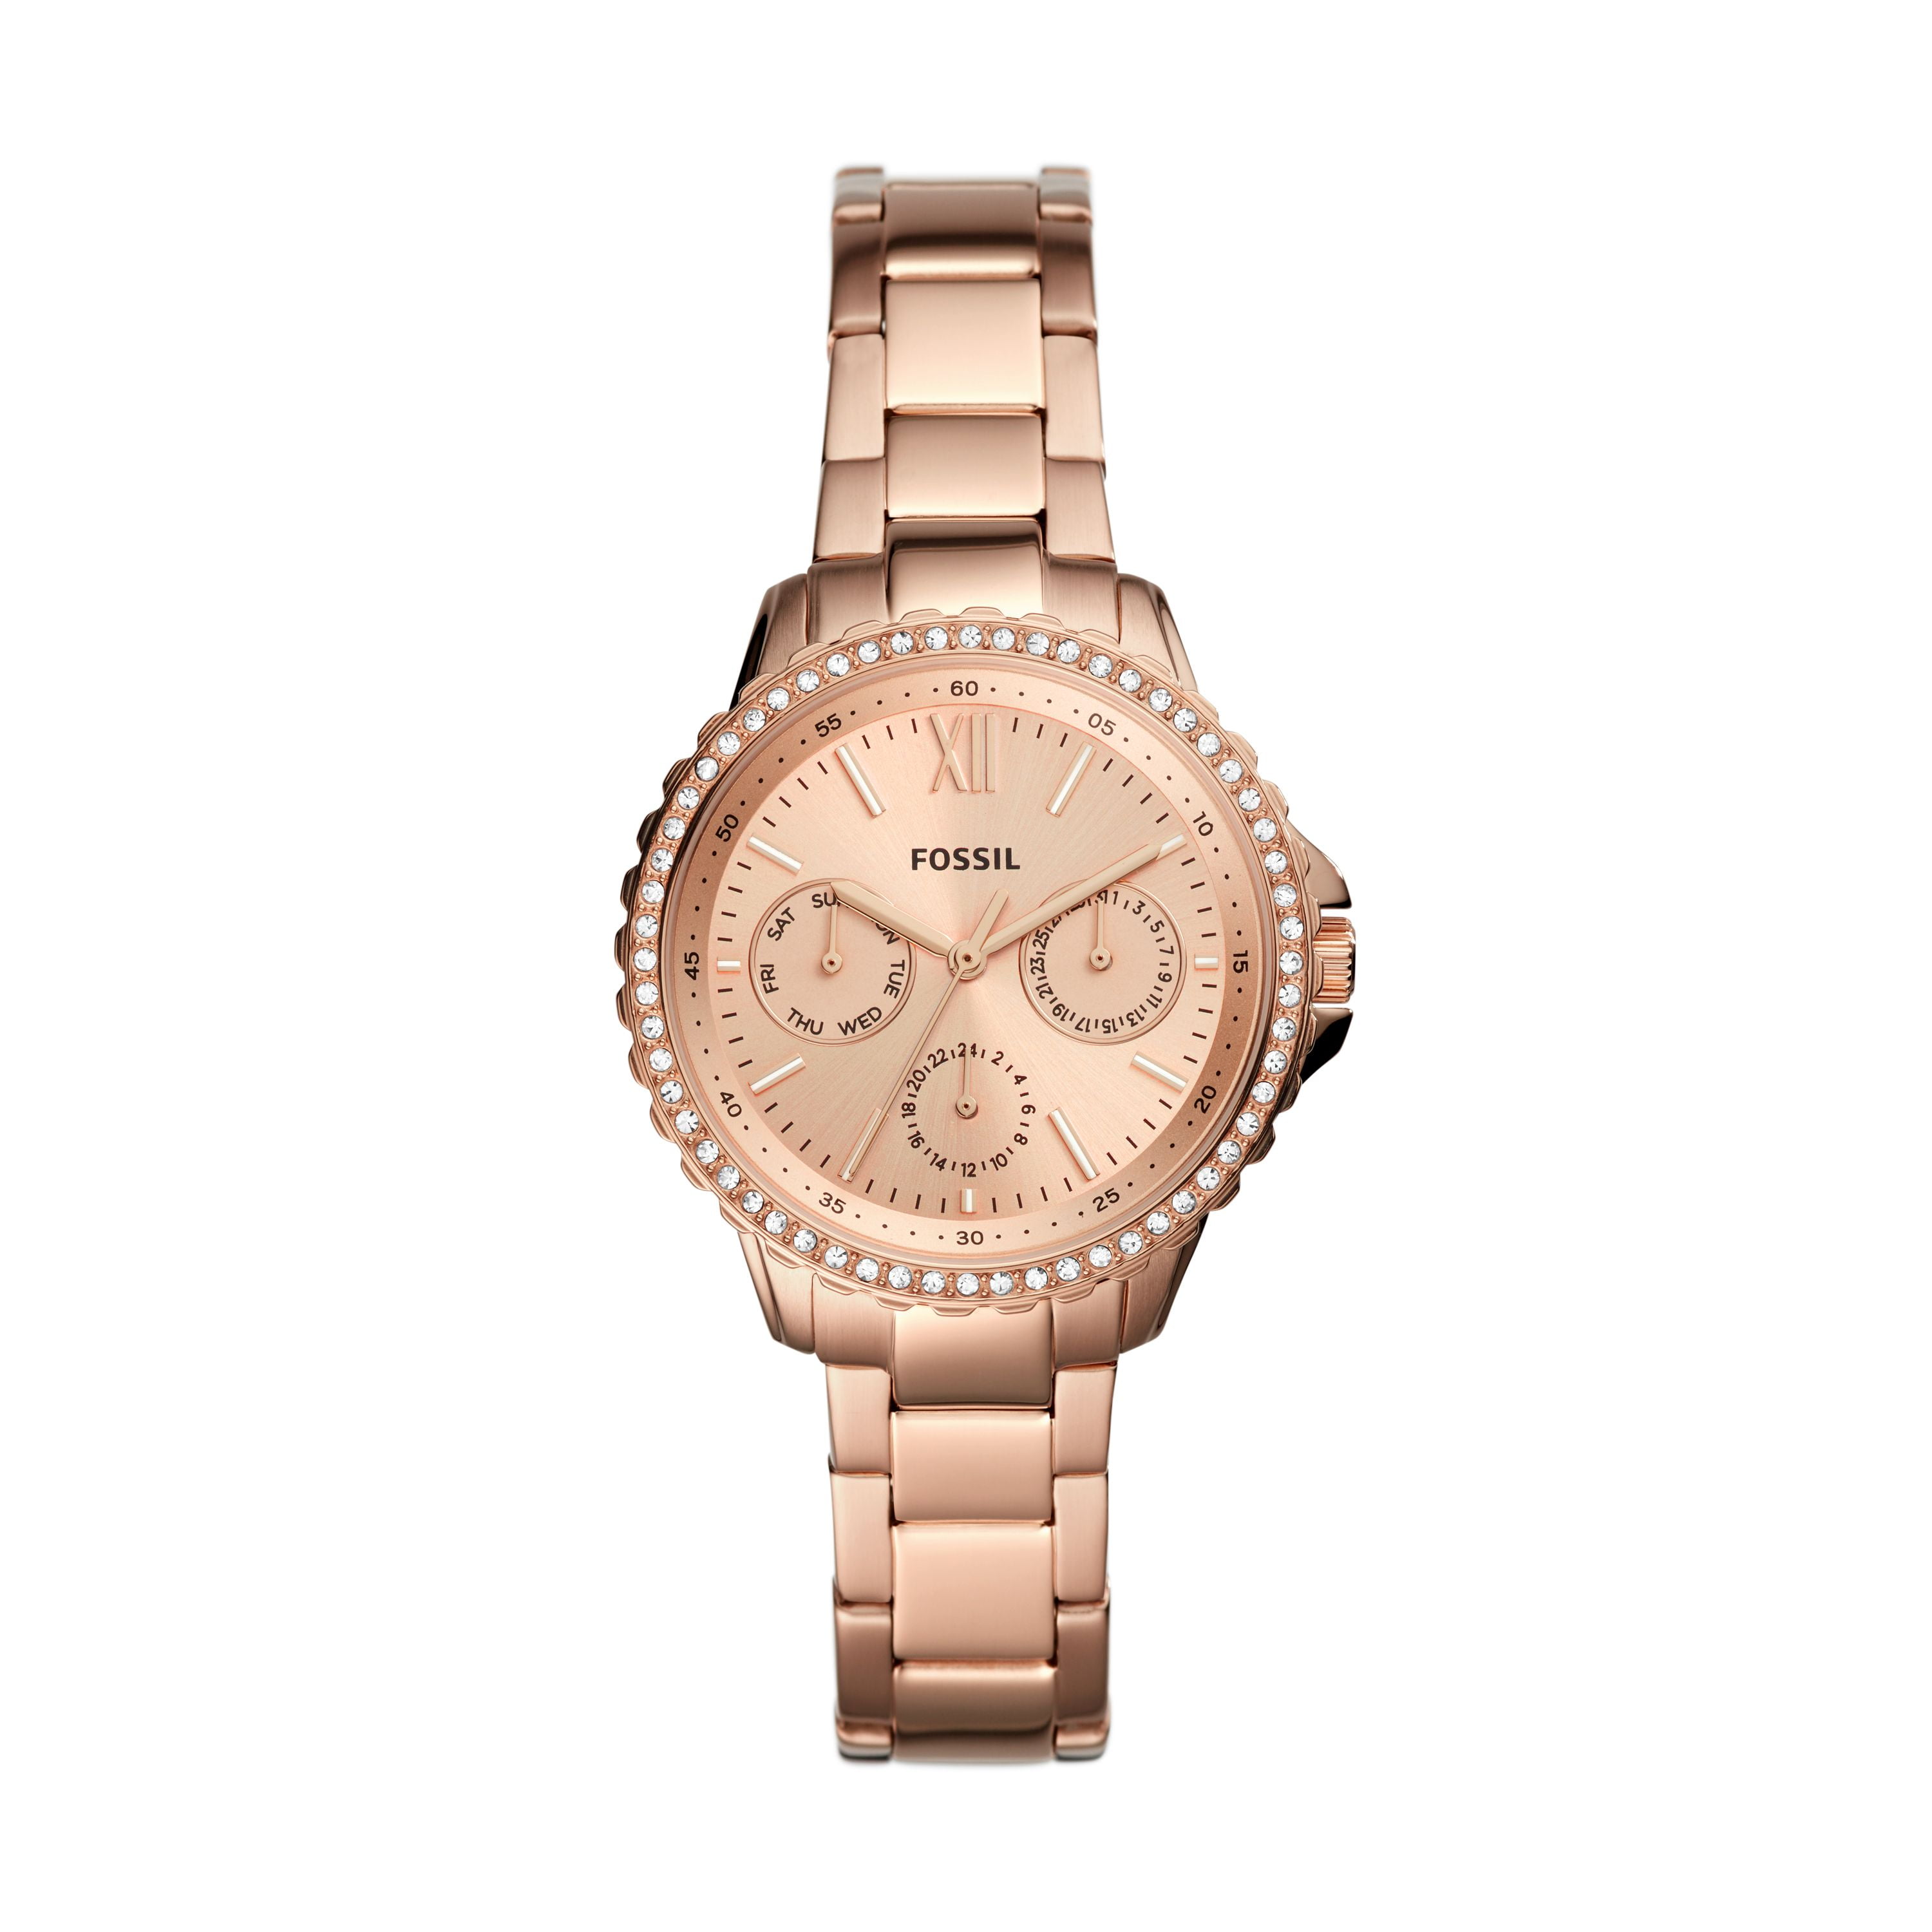 Fossil Ladies' Izzy Multifunction Rose Gold-Tone Stainless Steel